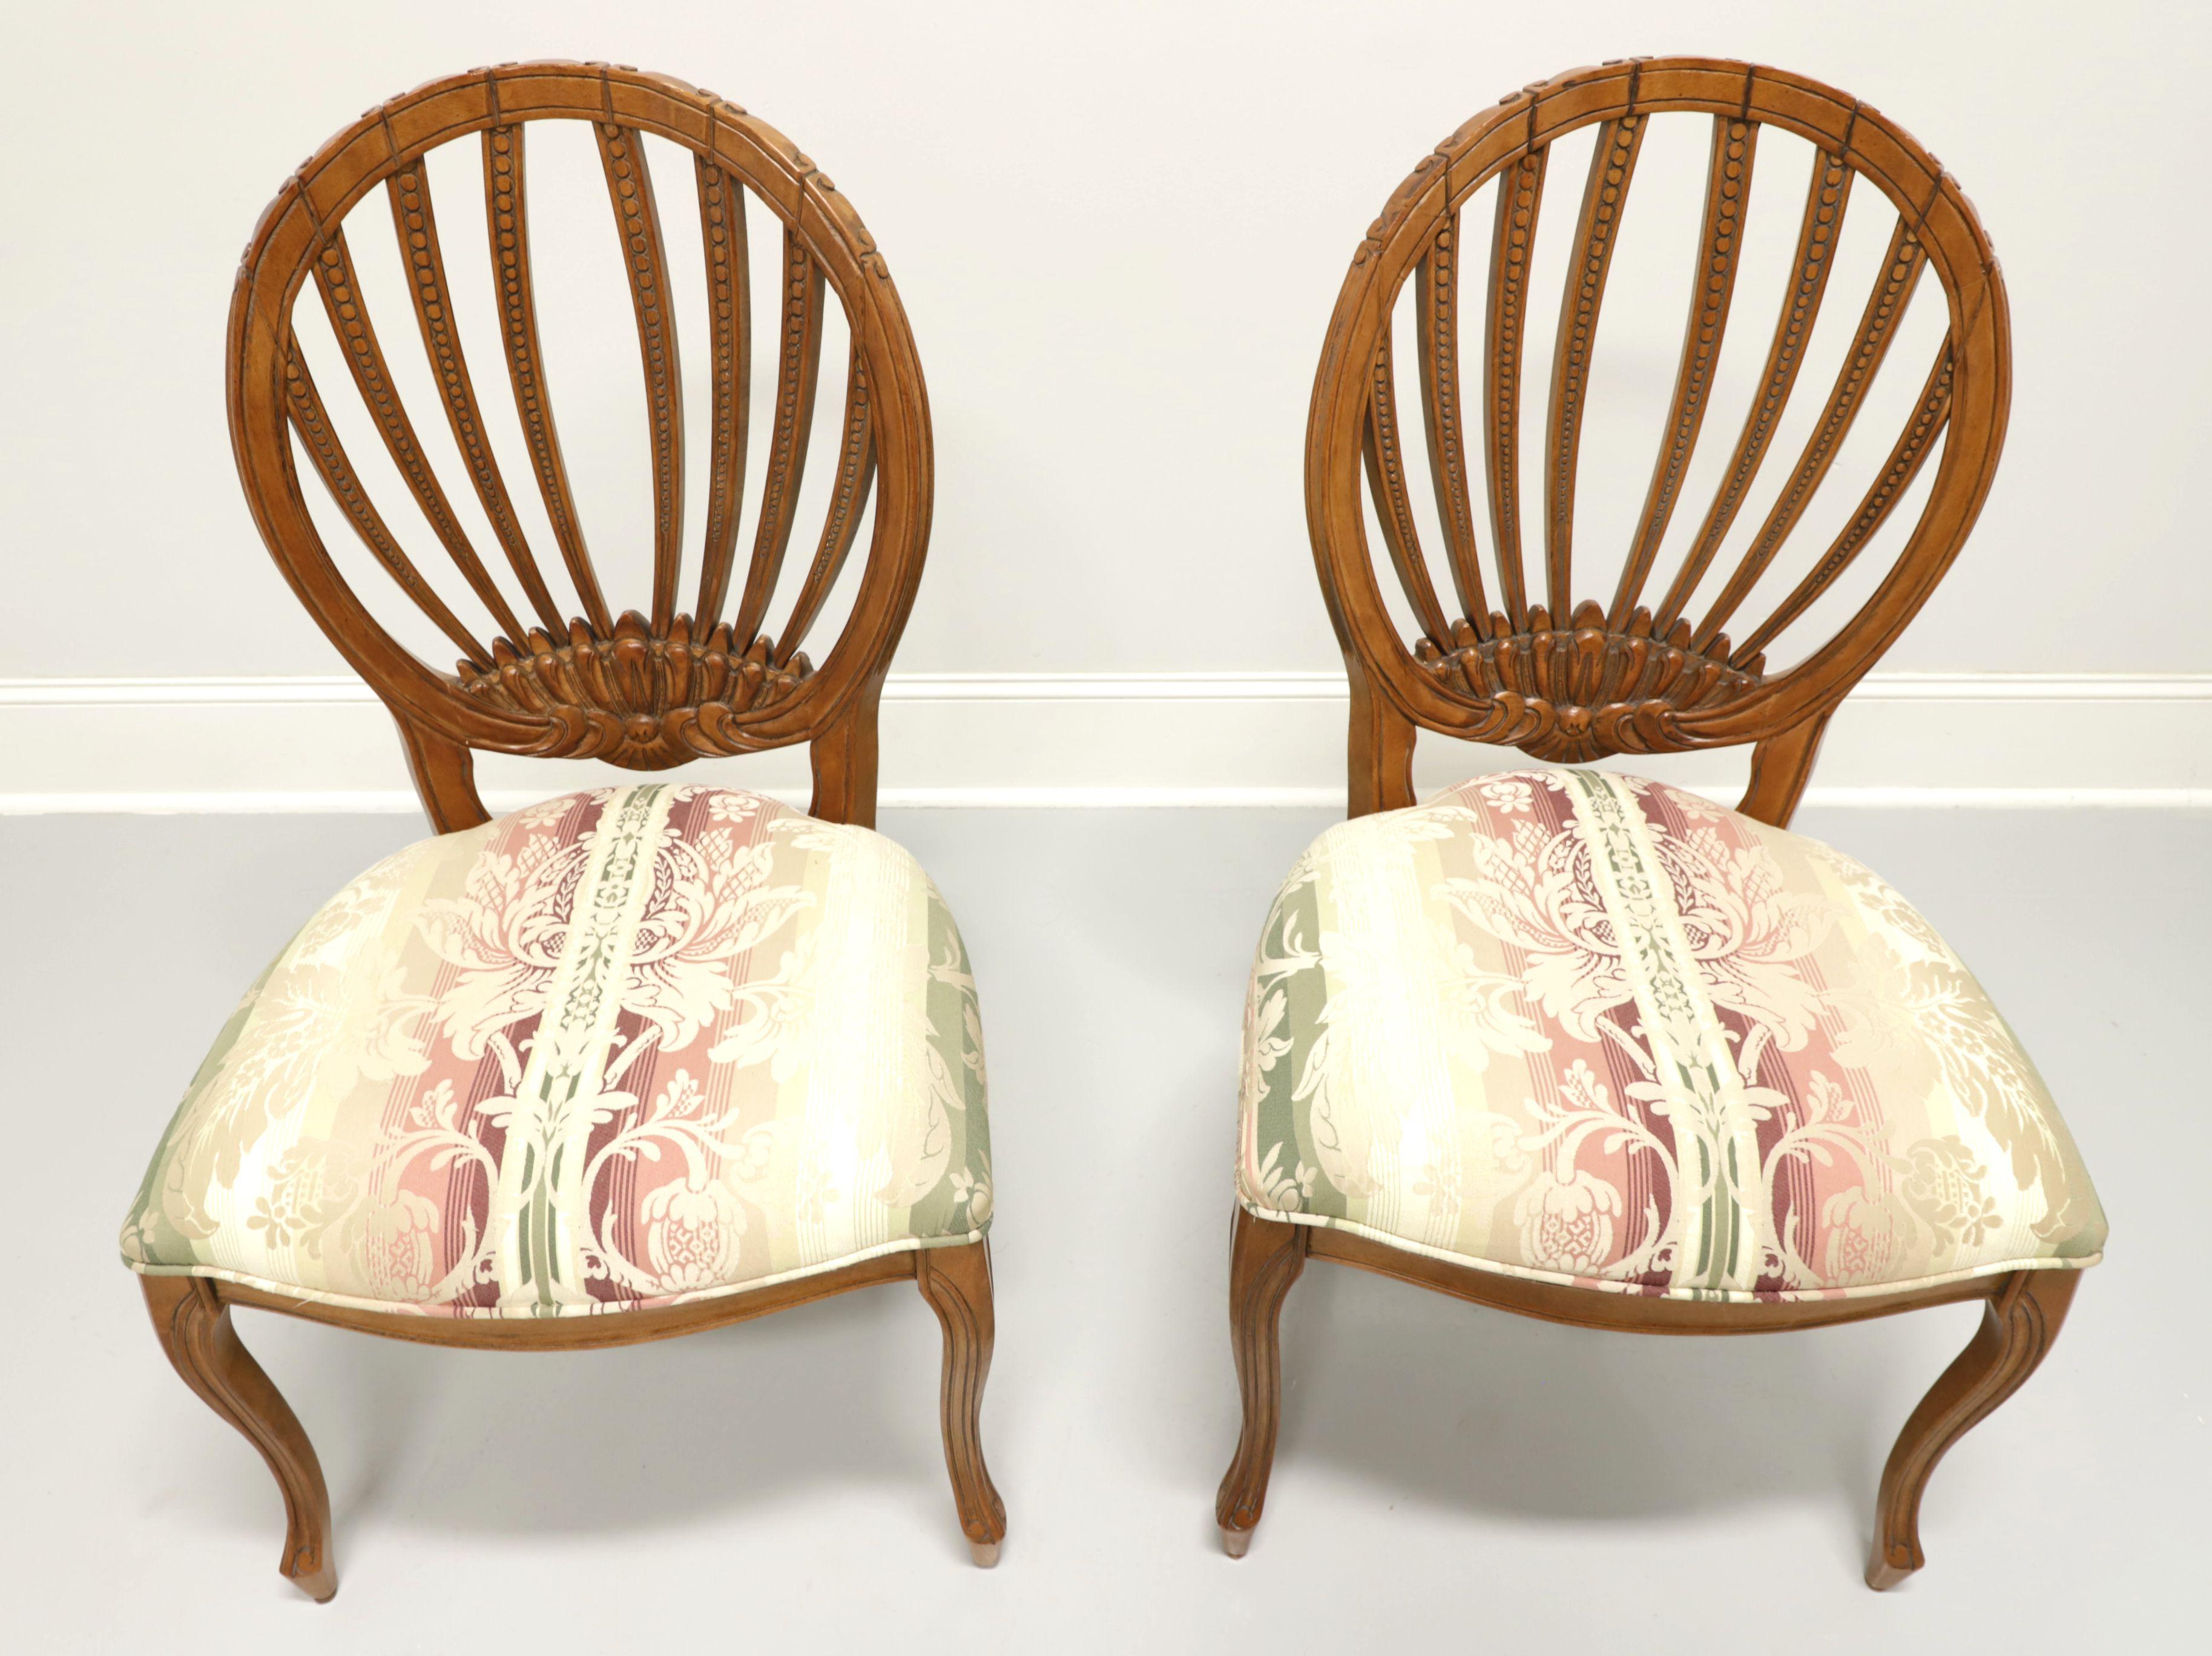 A pair of French Country style dining side chairs by Century Furniture, of Hickory, North Carolina, USA. Hardwood with a walnut finish, oval open carved design backs, floral striped pattern fabric upholstered seats and curved legs. Made in the early